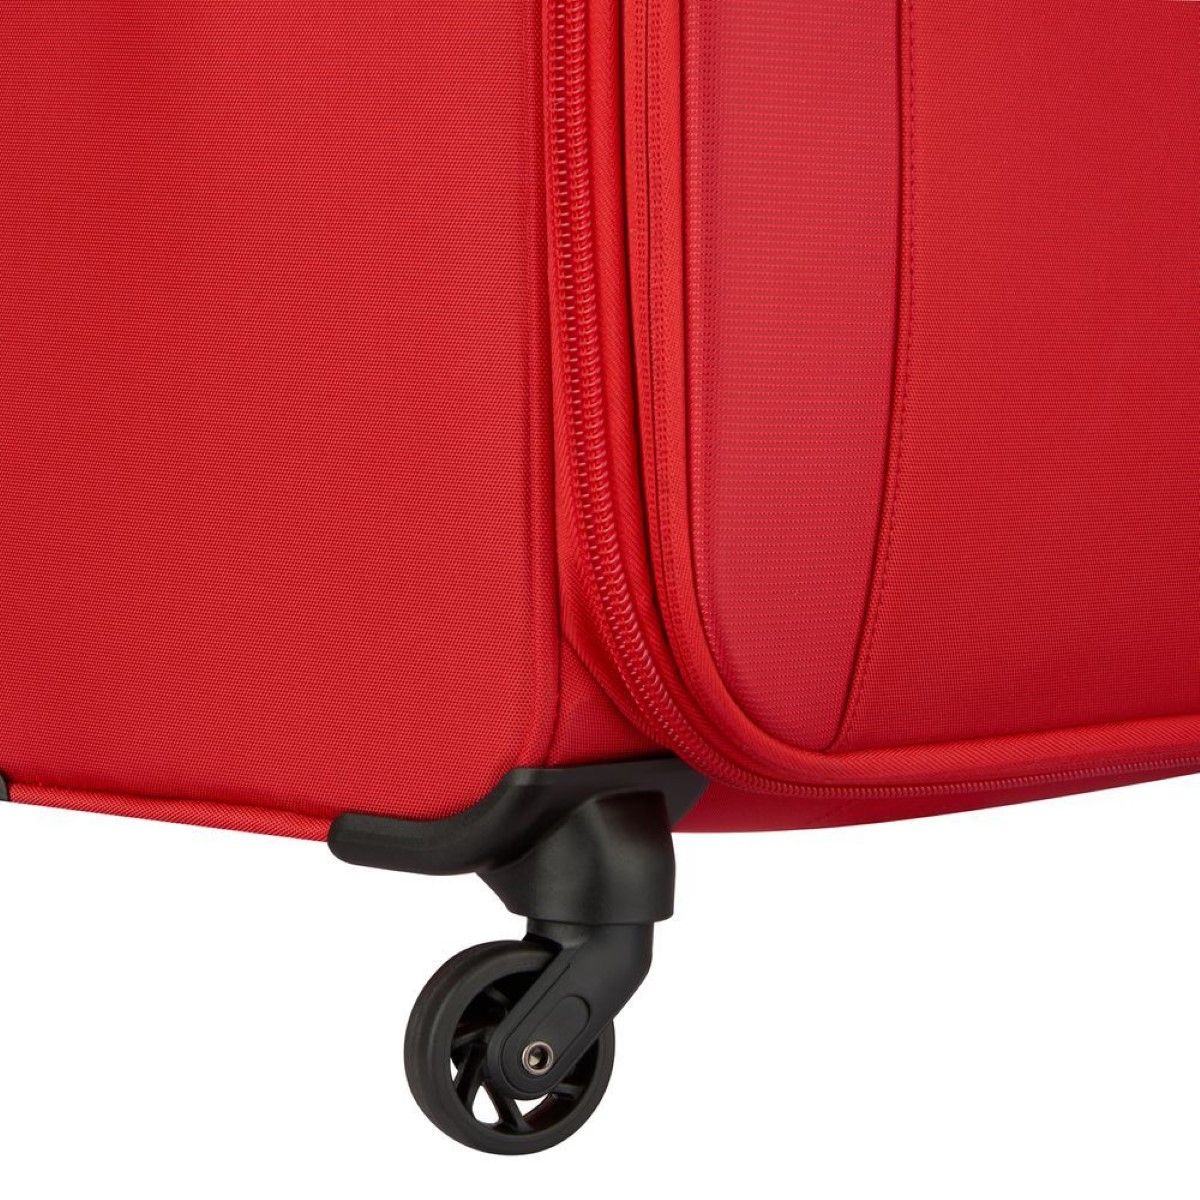 Mercure Slim Cabin Case 55 cm Delsey, light handluggage in durable fabric, with two silent wheels, double tube telescopic handle, TSA combination lock, front pocket, zipped compartment, and side handles.